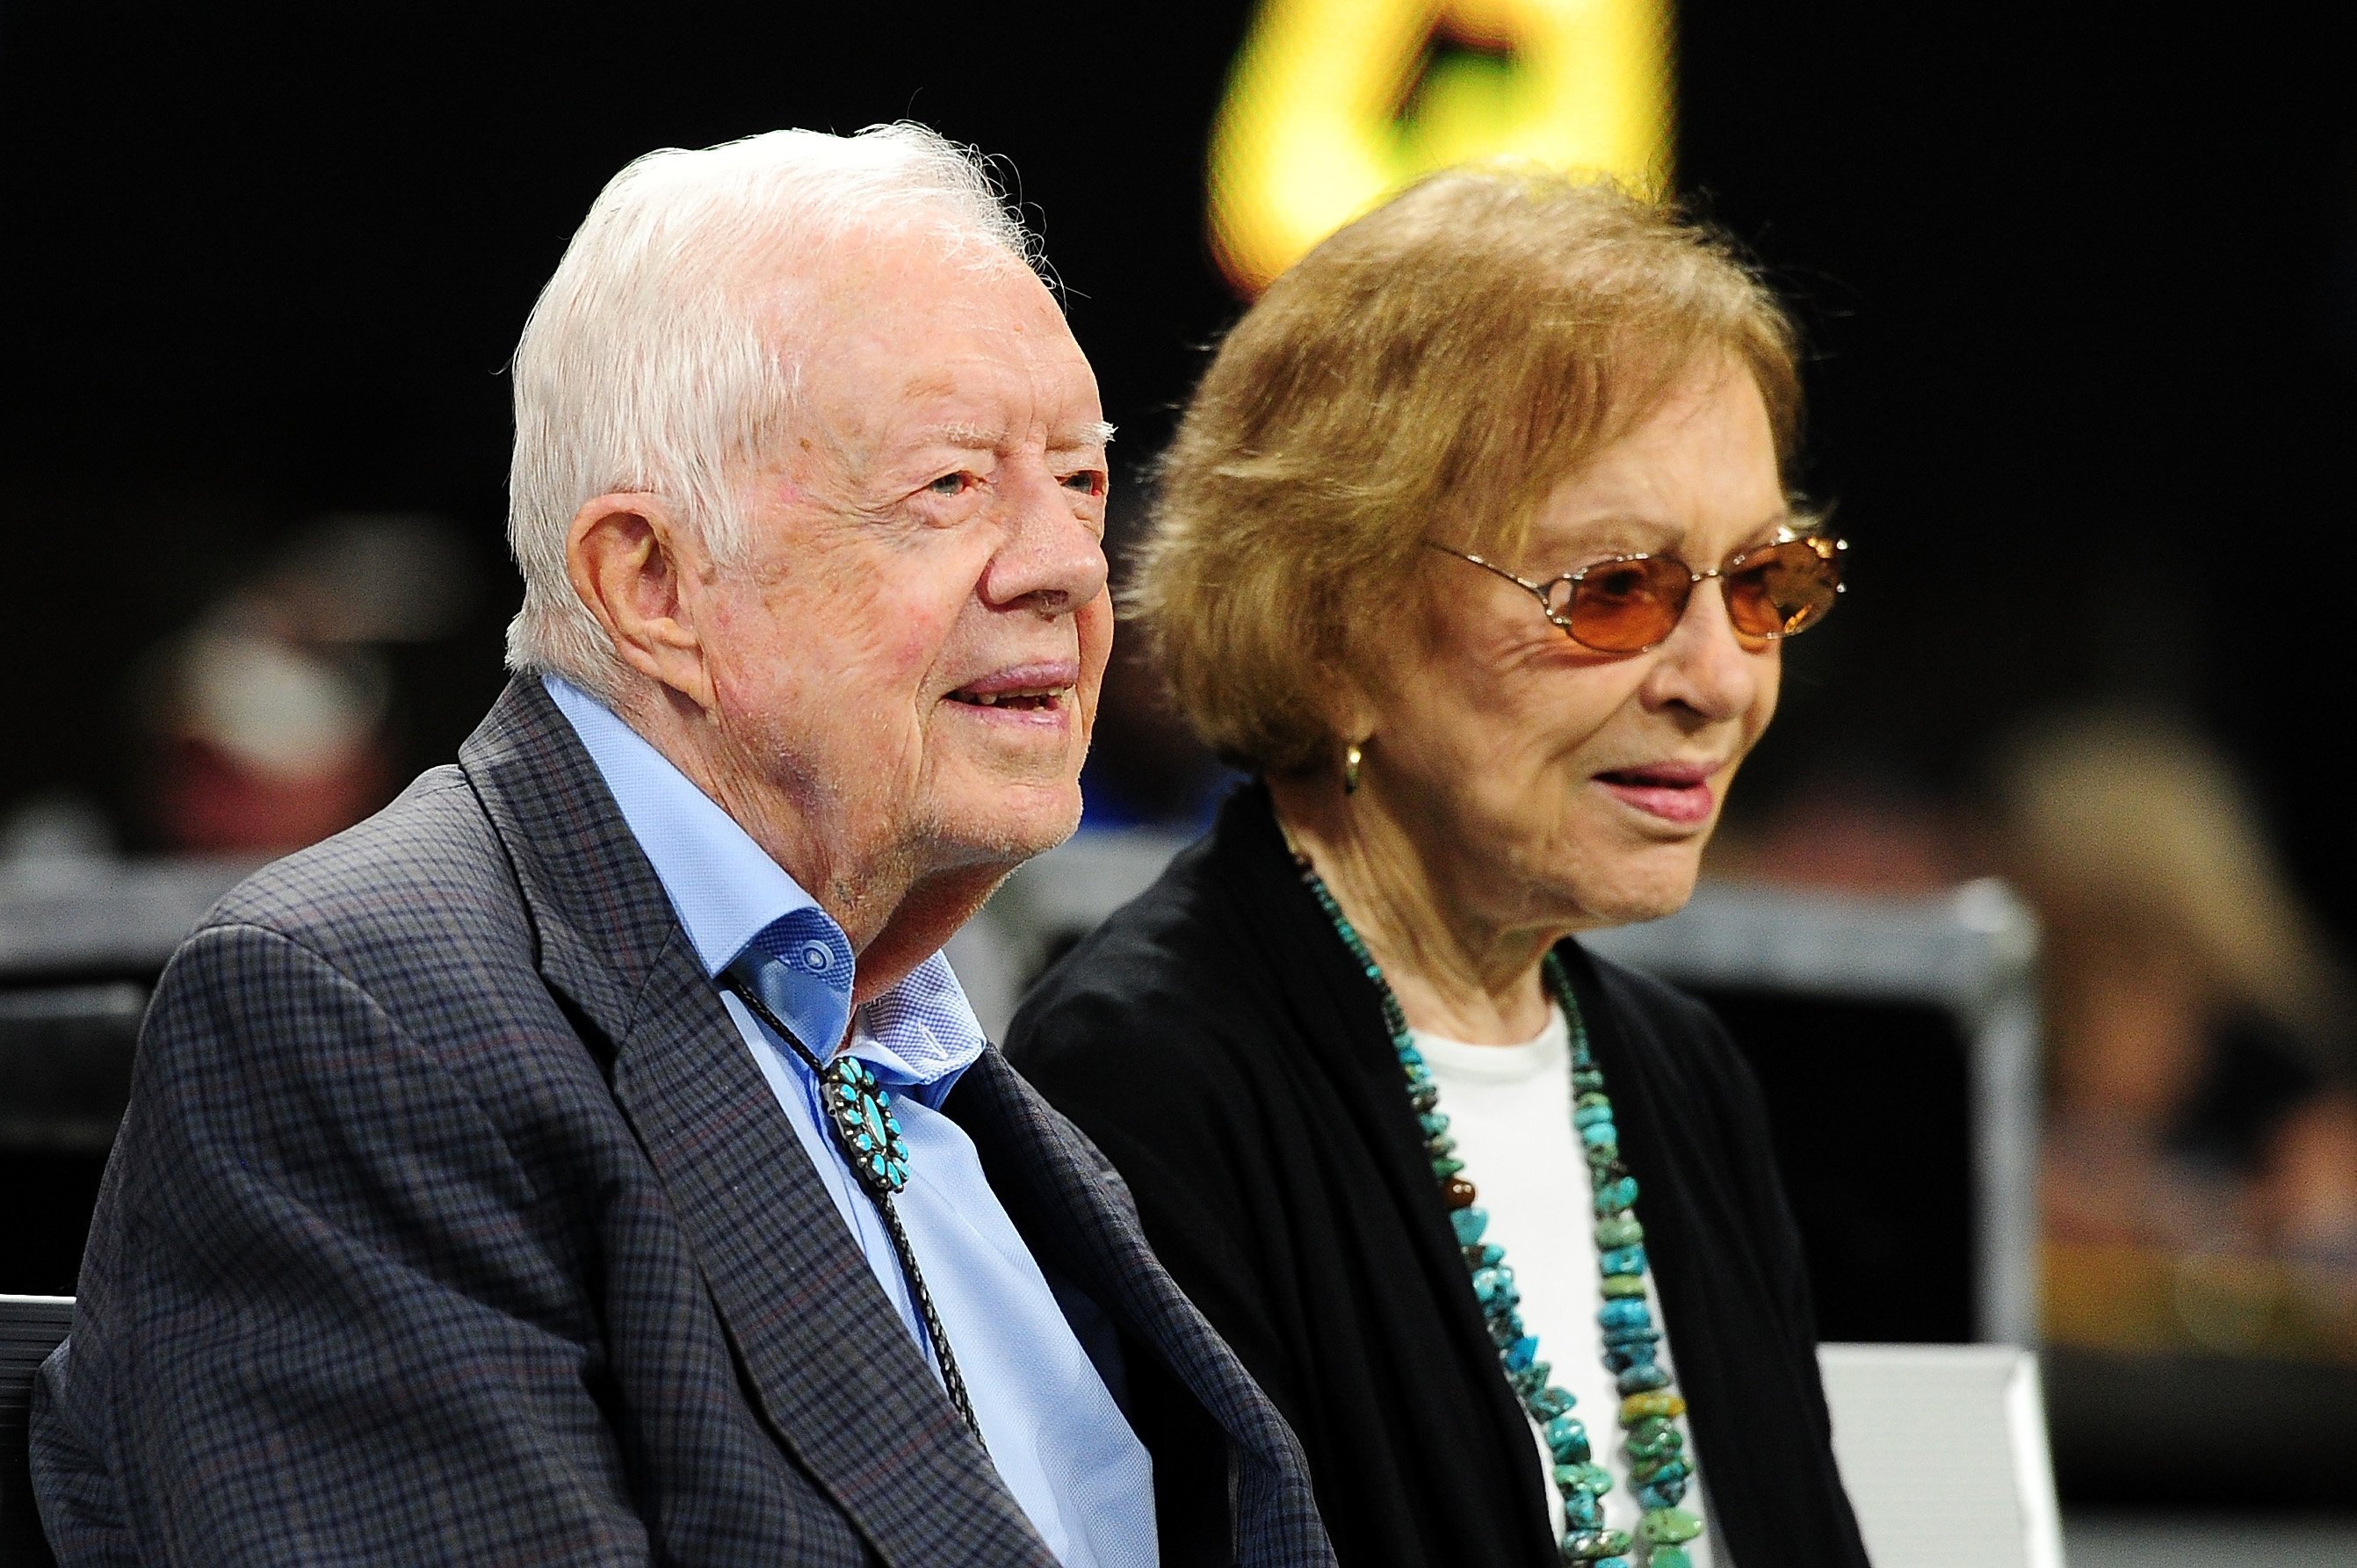 Jimmy Carter and his wife Rosalynn prior to the game between the Atlanta Falcons and the Cincinnati Bengals at Mercedes-Benz Stadium on September 30, 2018, in Atlanta, Georgia. | Source: Getty Images.